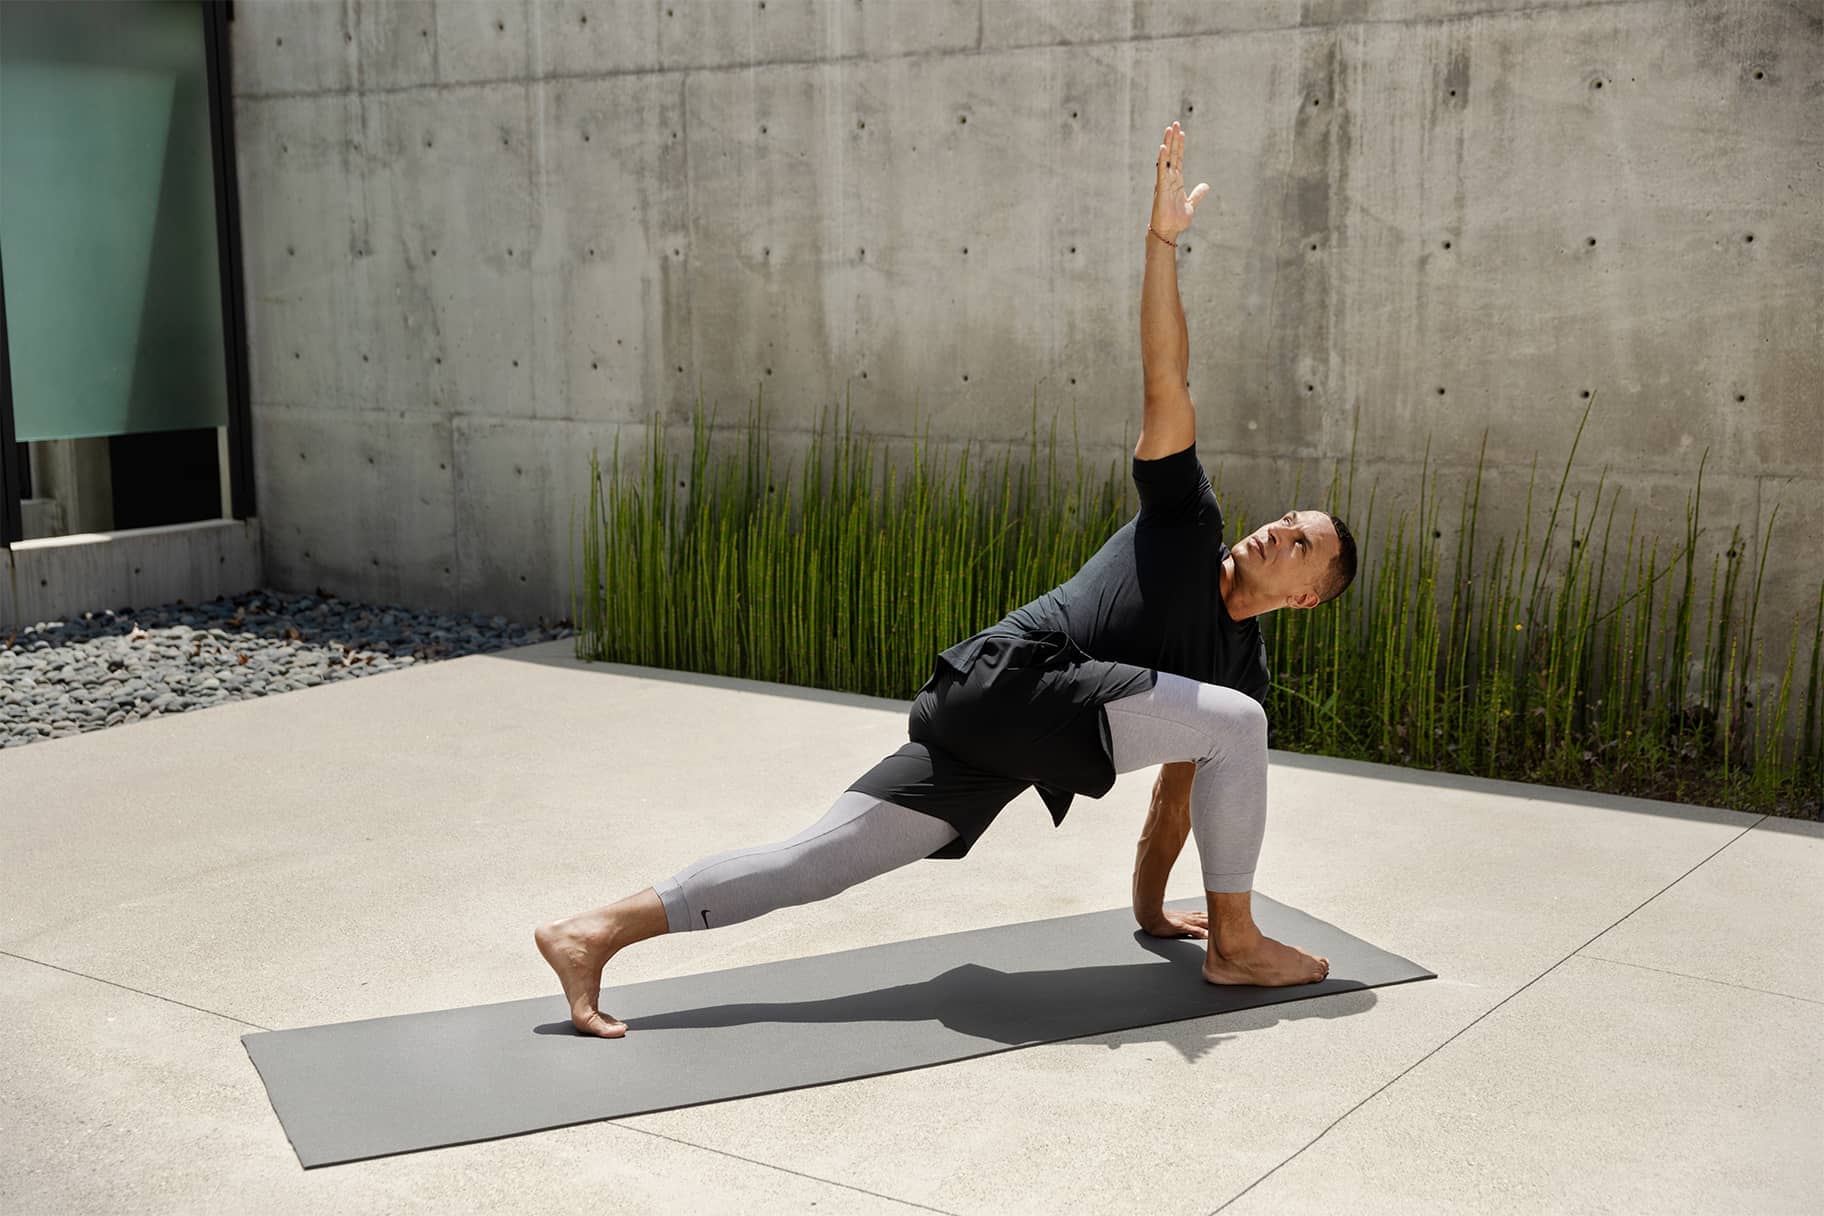 The 7 Best Yoga Poses for Beginners, According to Yoga Instructors